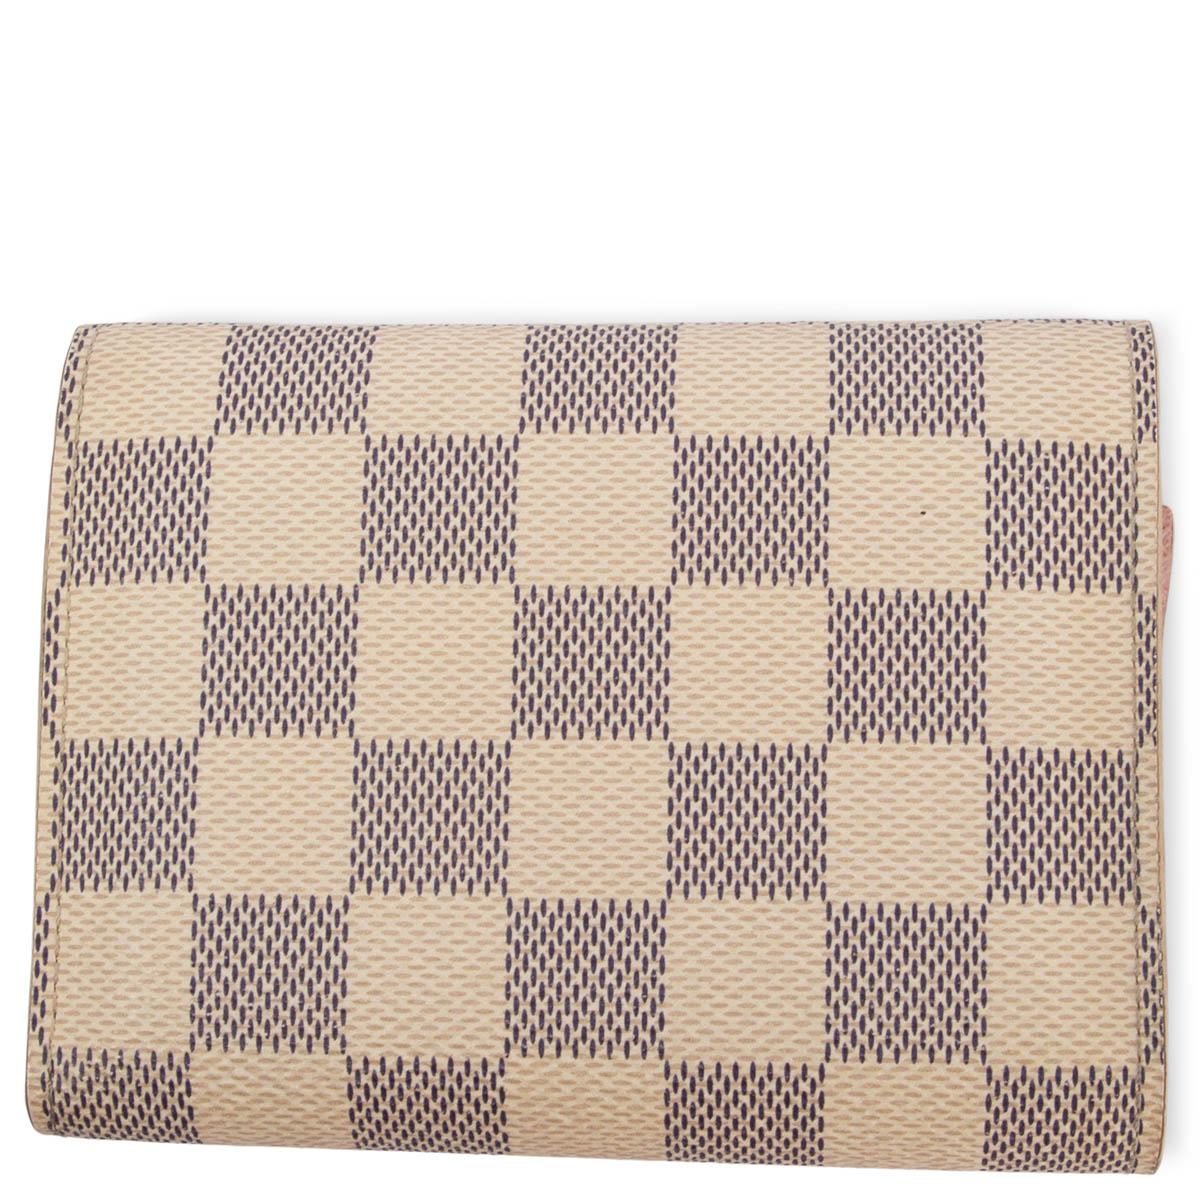 100% authentic Louis Vuitton Victorine Damier Azur and Rose Ballerine Pink wallet with grained cowhide-leather trim and lining. Opens with a press-stud closure to an interior with 6 card slots, zipped coin pocket, bill pocket and 2 flat pockets. Has